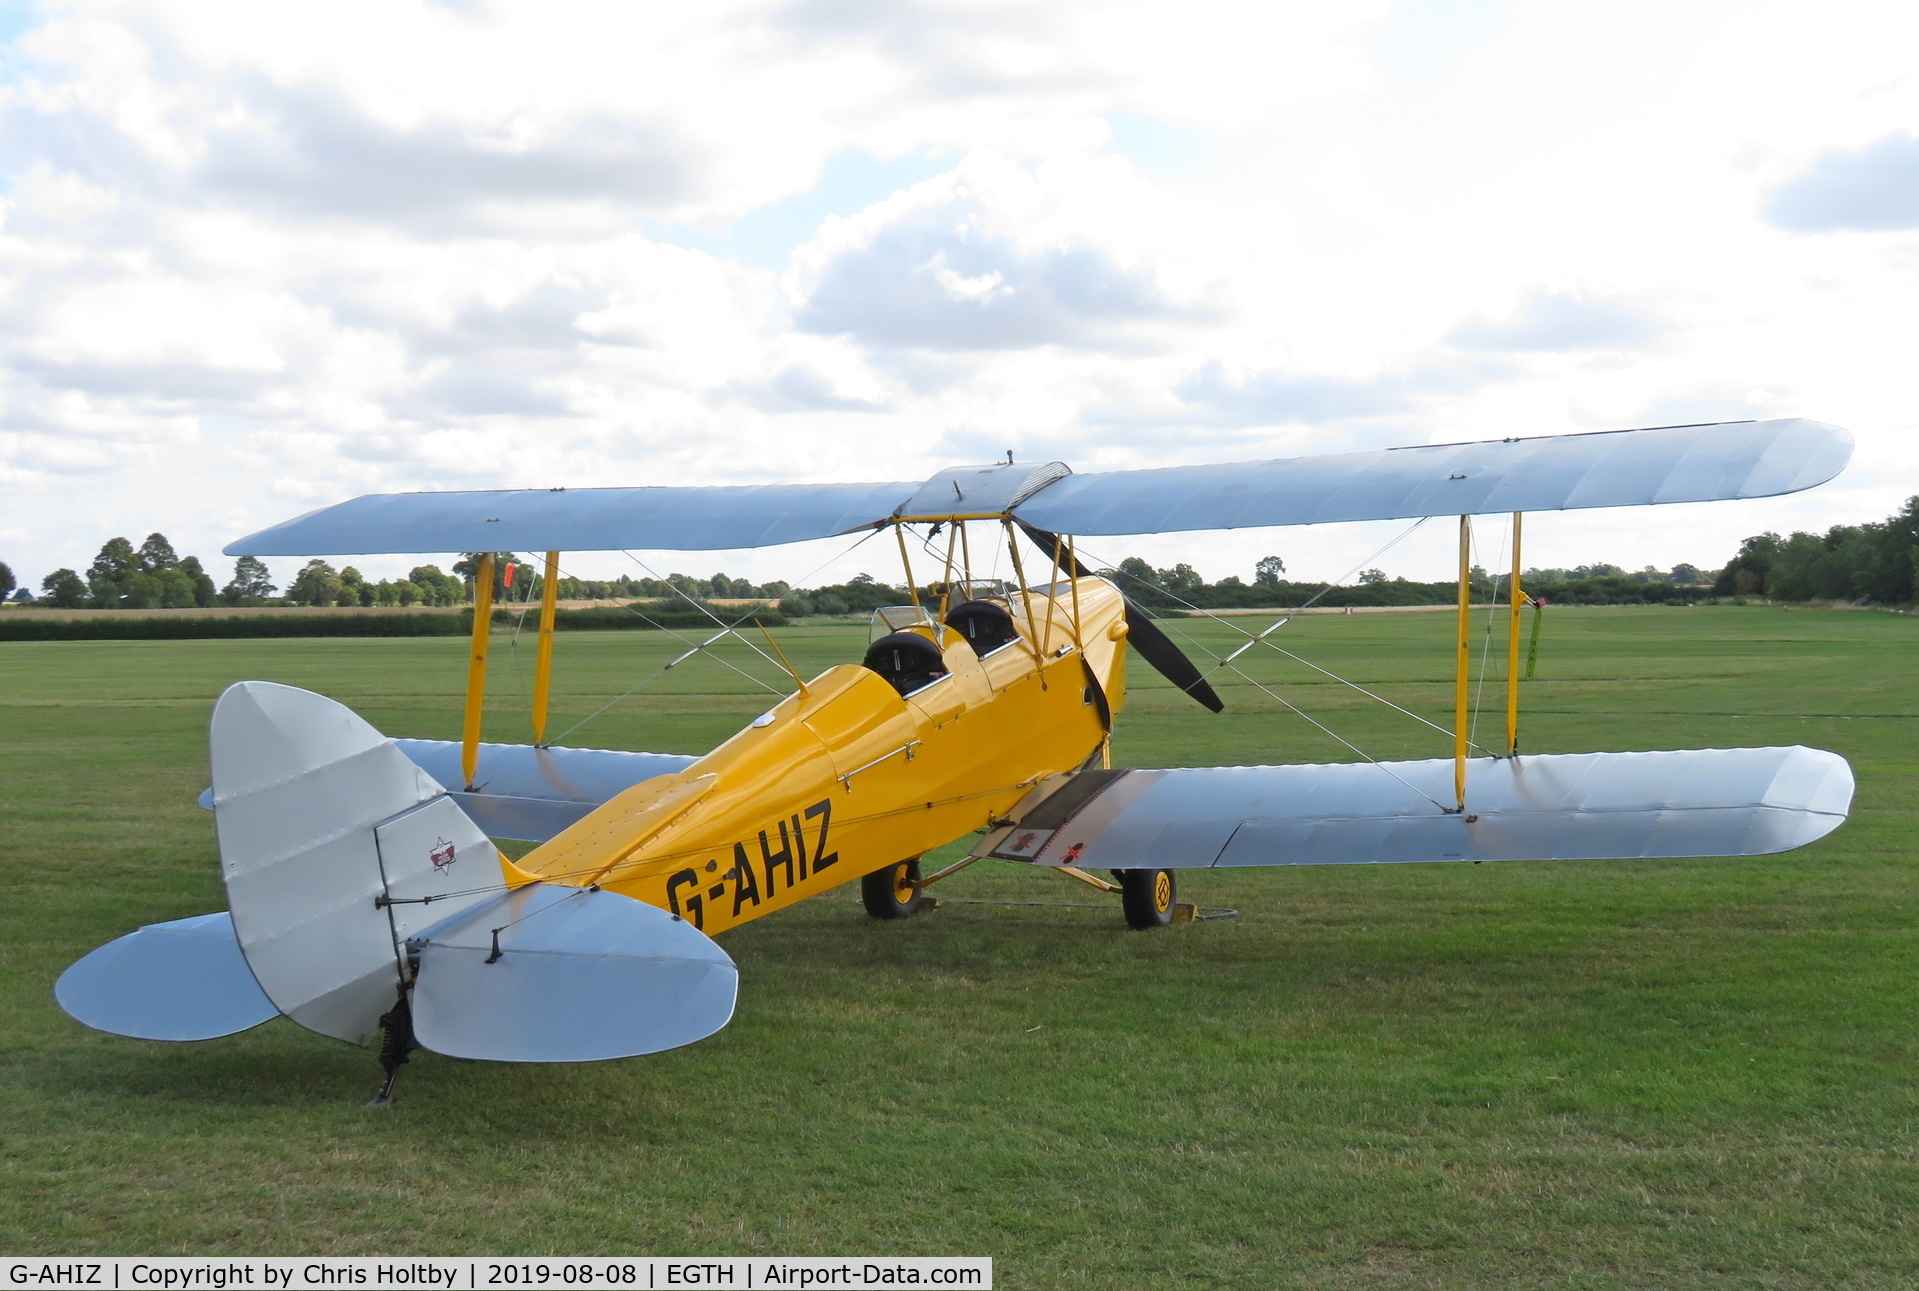 G-AHIZ, 1944 De Havilland DH-82A Tiger Moth II C/N 4610, On display at Old Warden as part of the 'Gathering of Moths' Day 2019